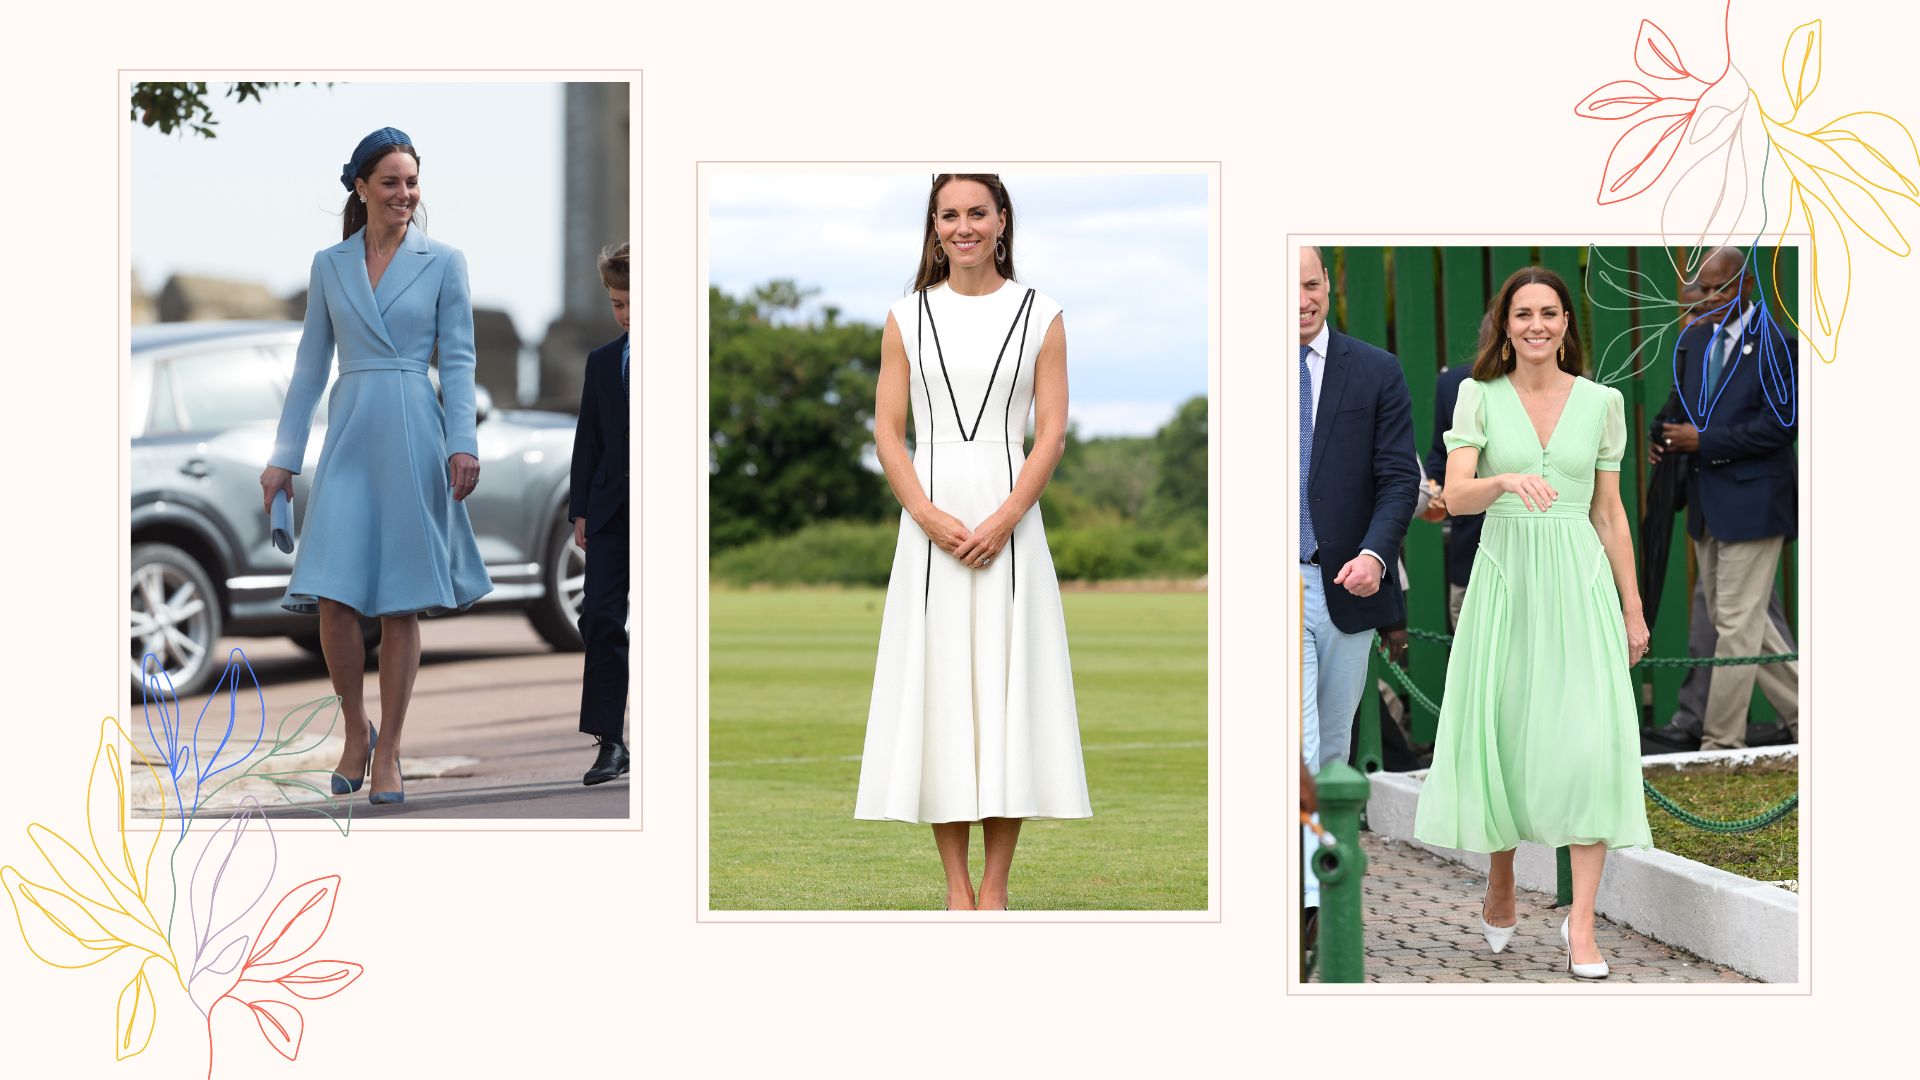 Kate Middleton's dresses: 11 places the Princess of Wales shops